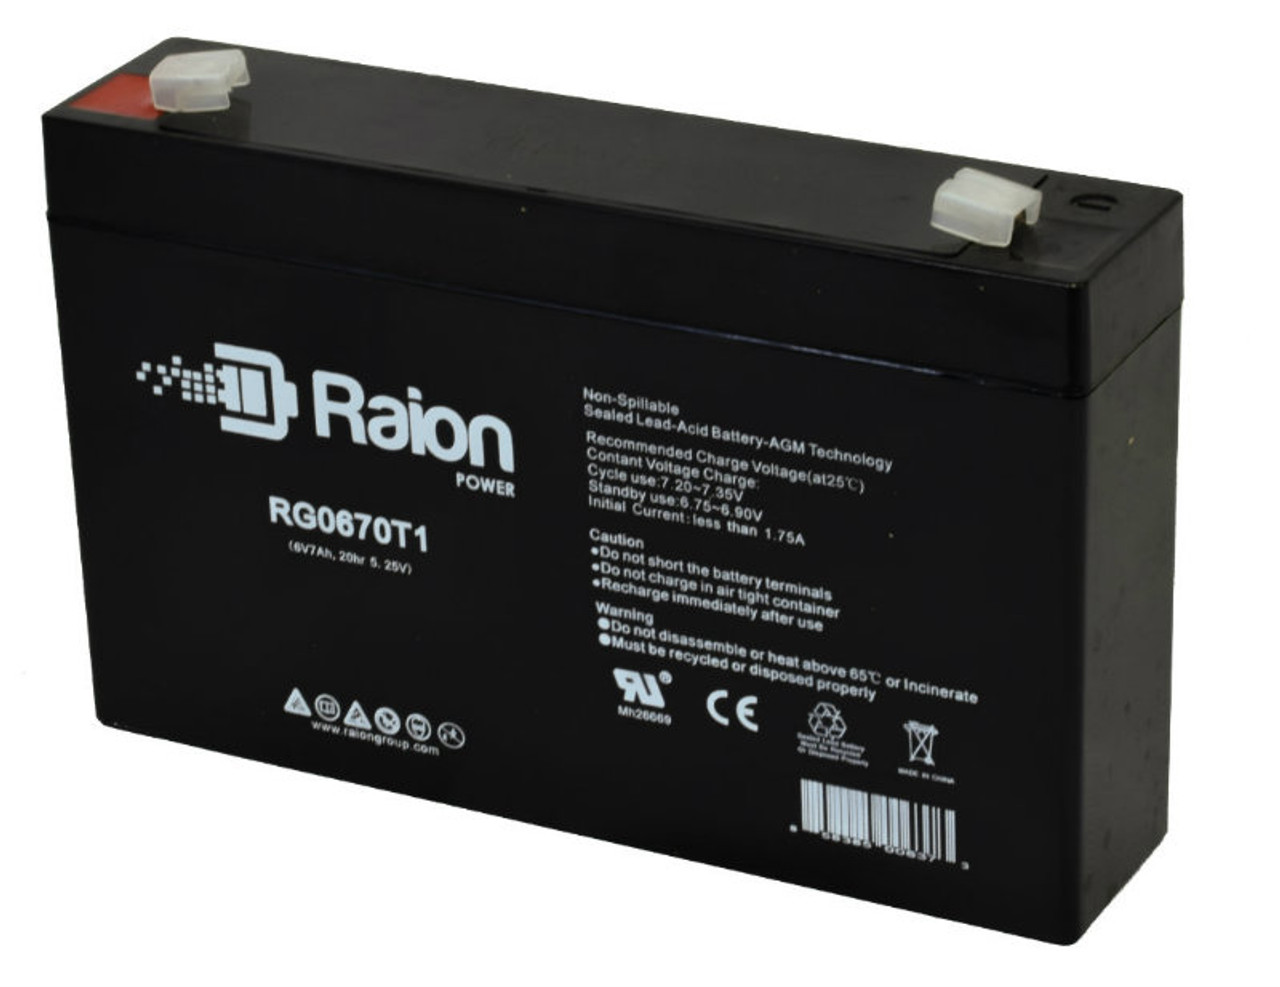 Raion Power RG0670T1 Replacement Battery for Valen Topin 6 TP 7 OEM Battery